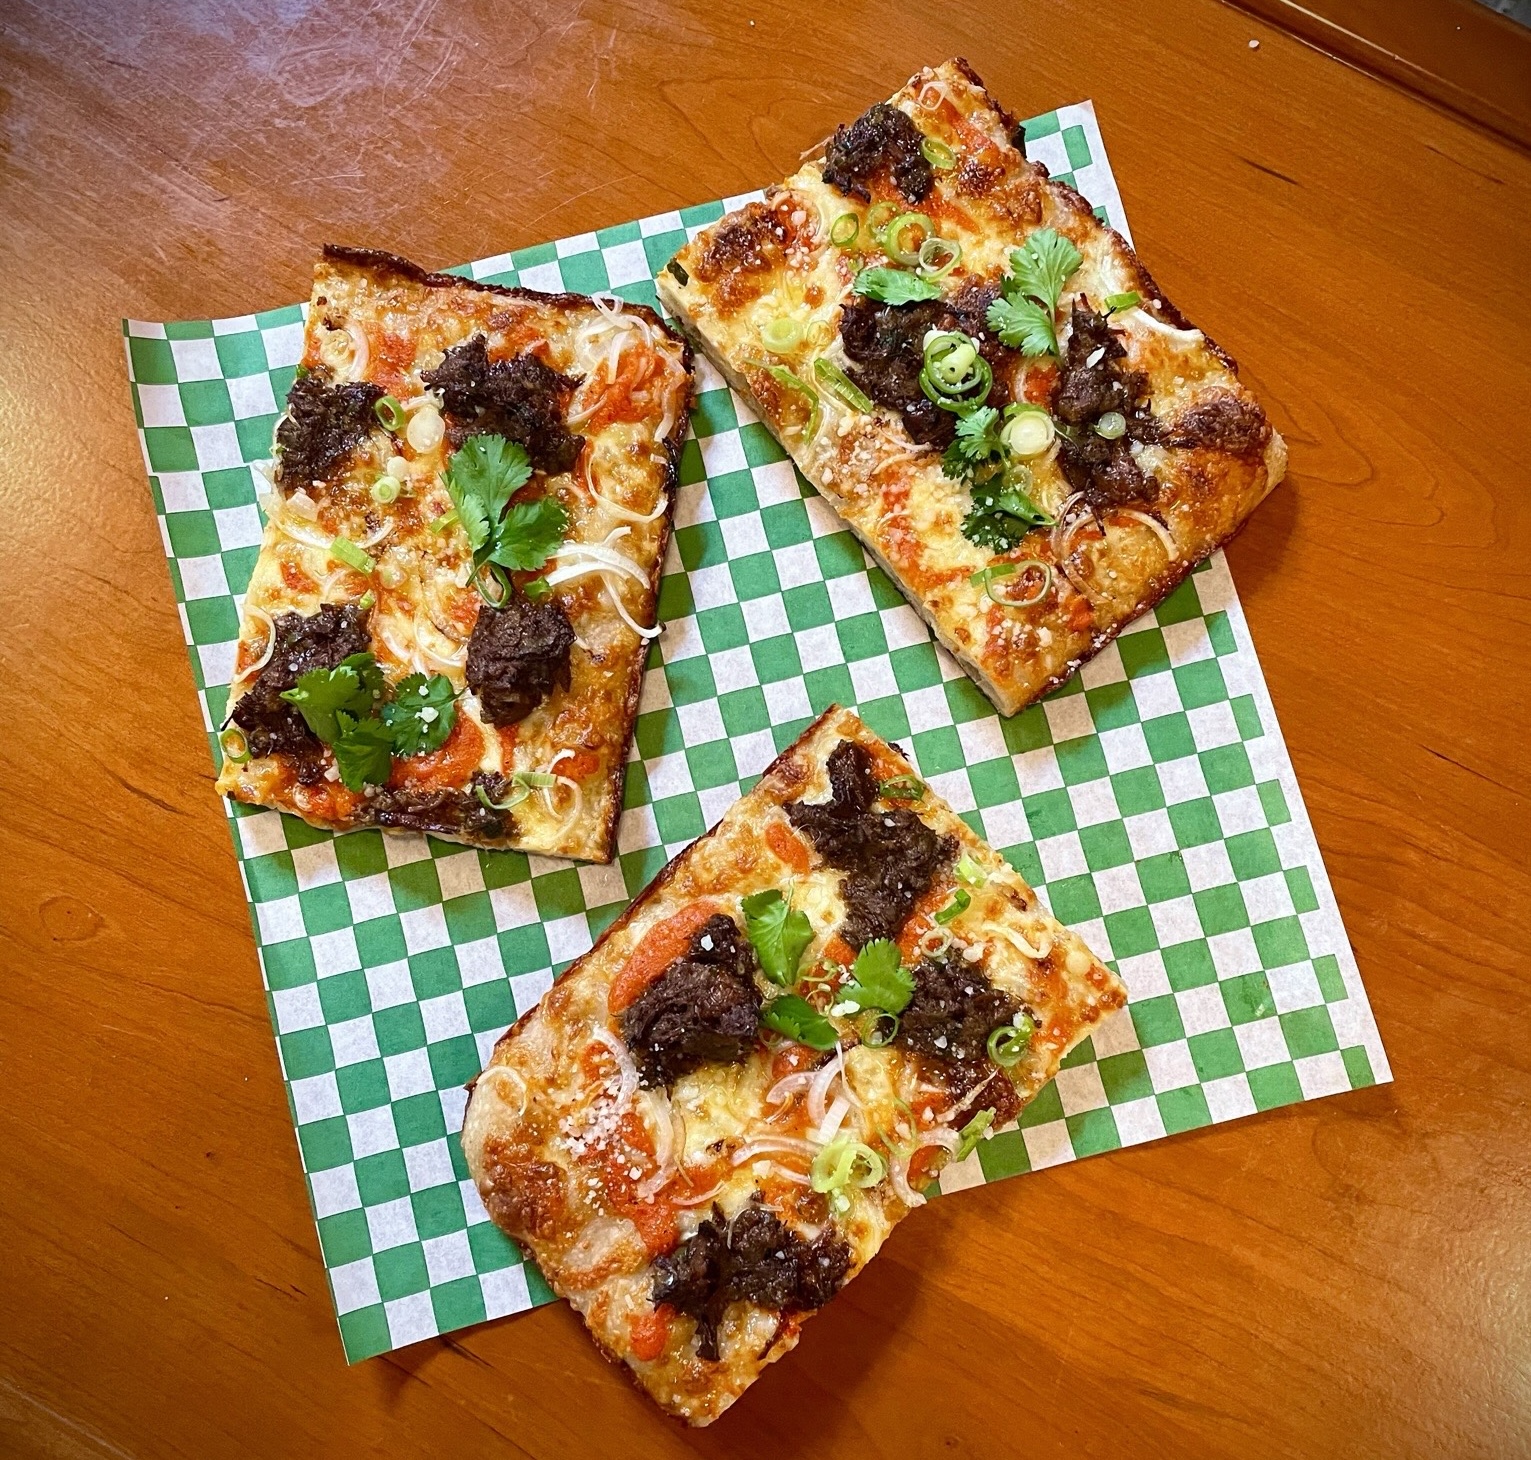 Three square slices of pizza on a green checkerboard paper with oxtail on top. All sitting on a wood table.